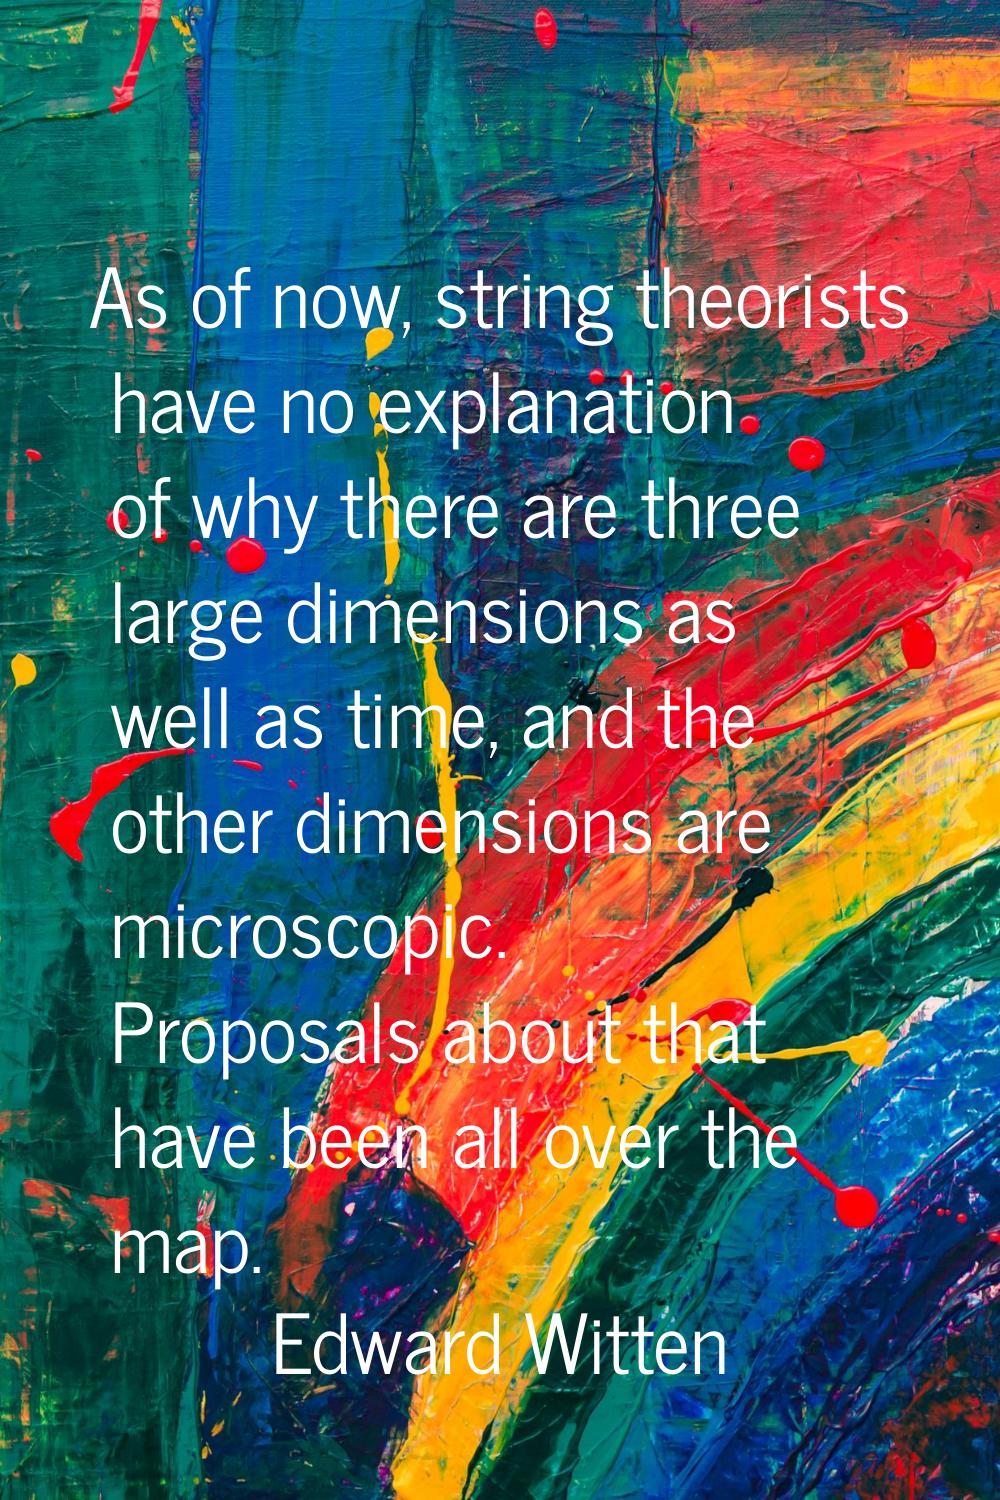 As of now, string theorists have no explanation of why there are three large dimensions as well as 